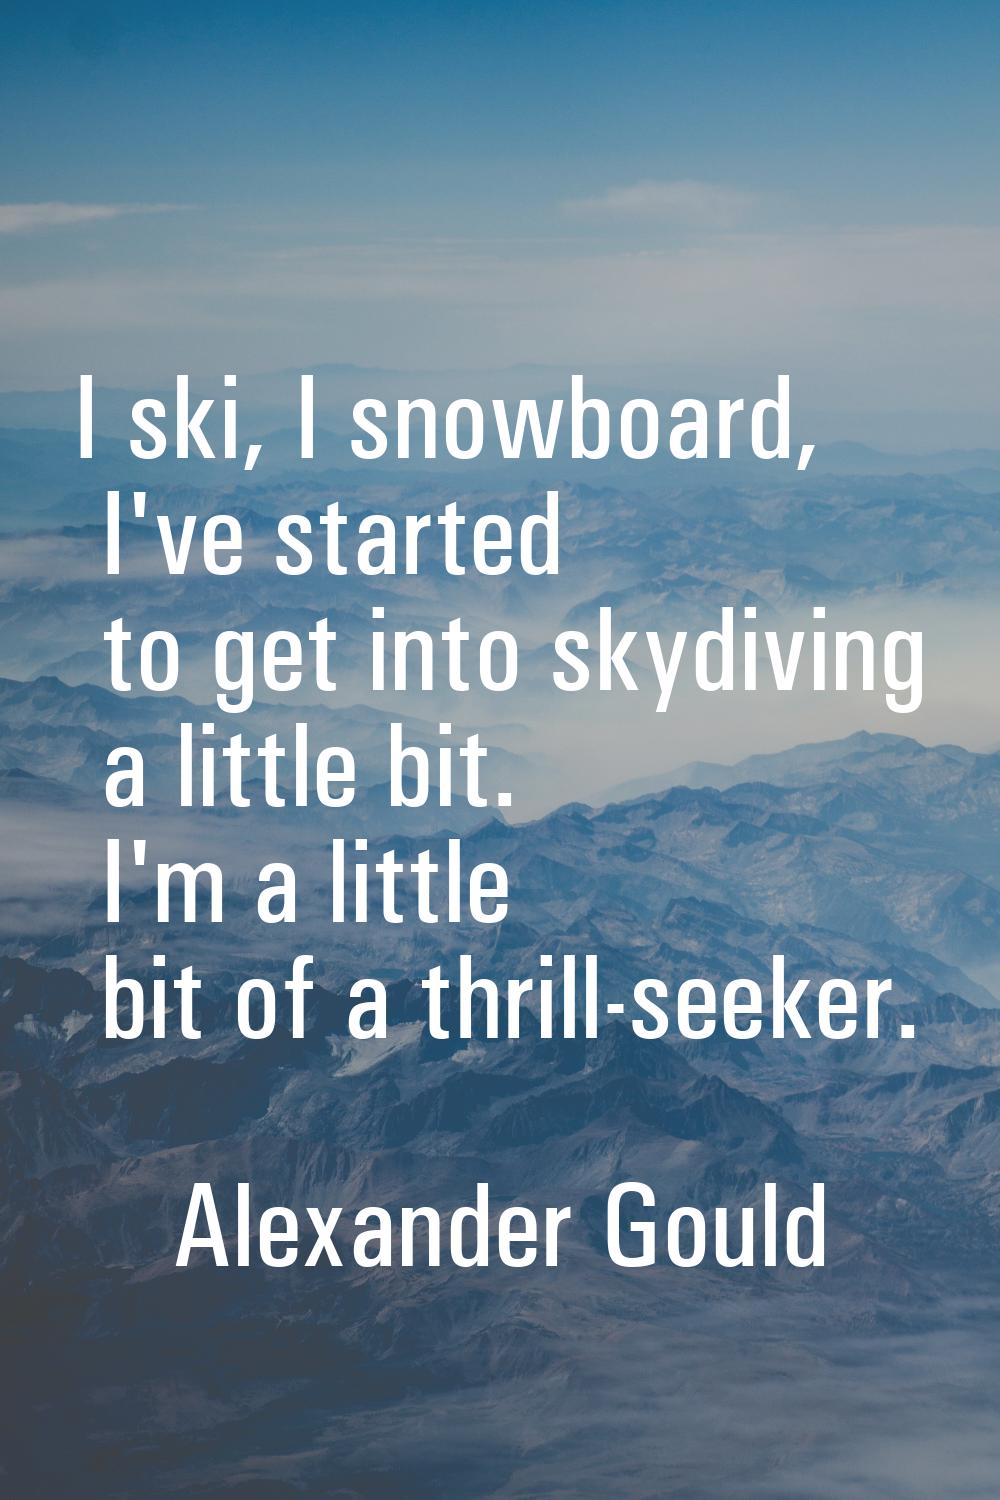 I ski, I snowboard, I've started to get into skydiving a little bit. I'm a little bit of a thrill-s